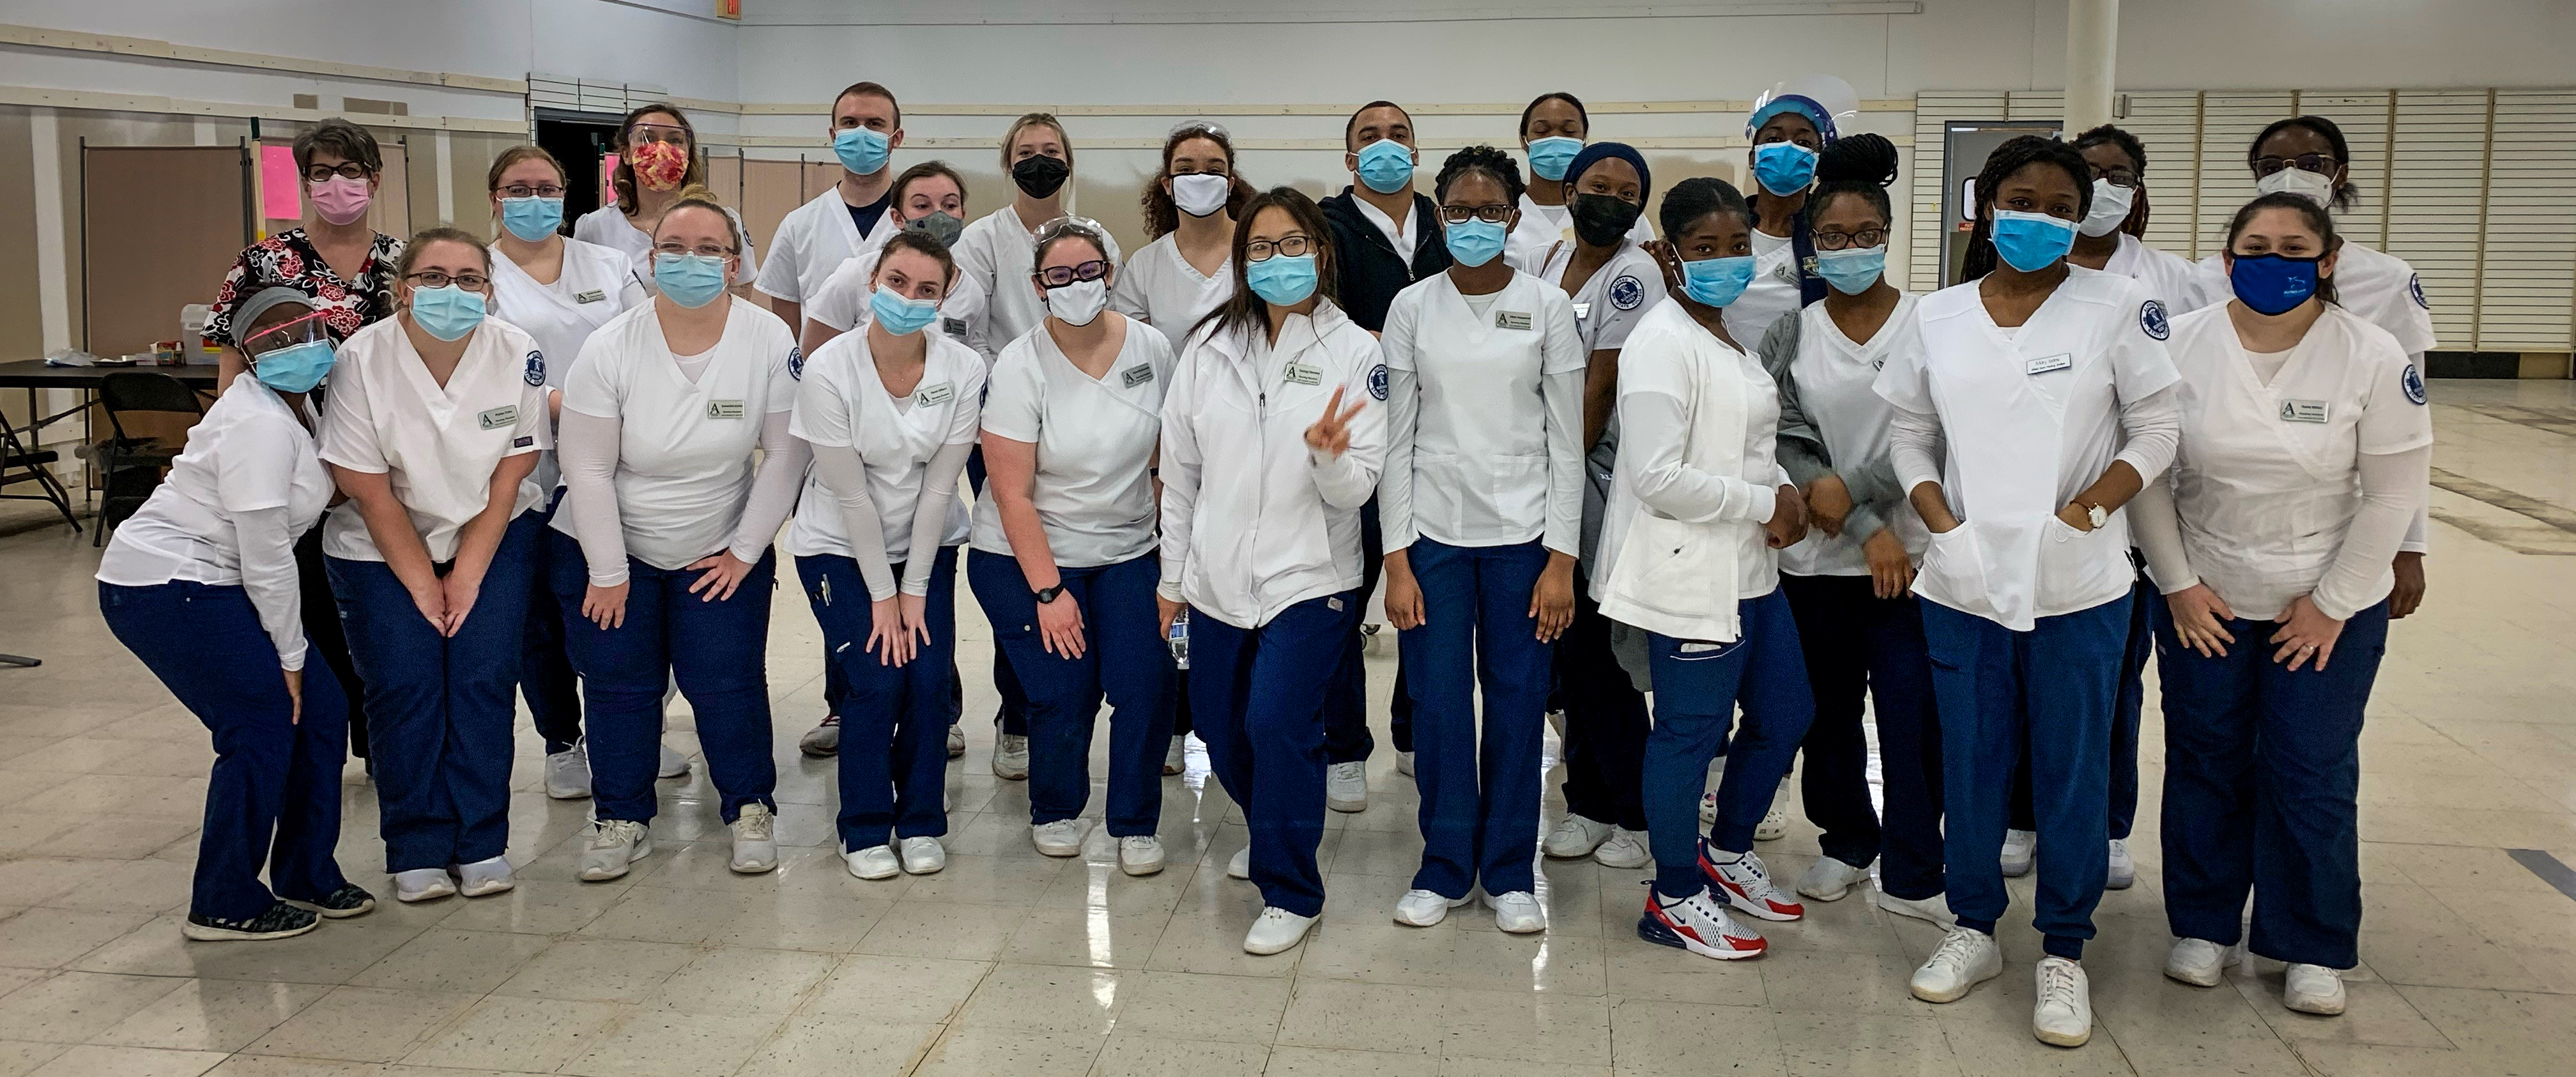 ASC Nursing Students at a Vaccine Clinic